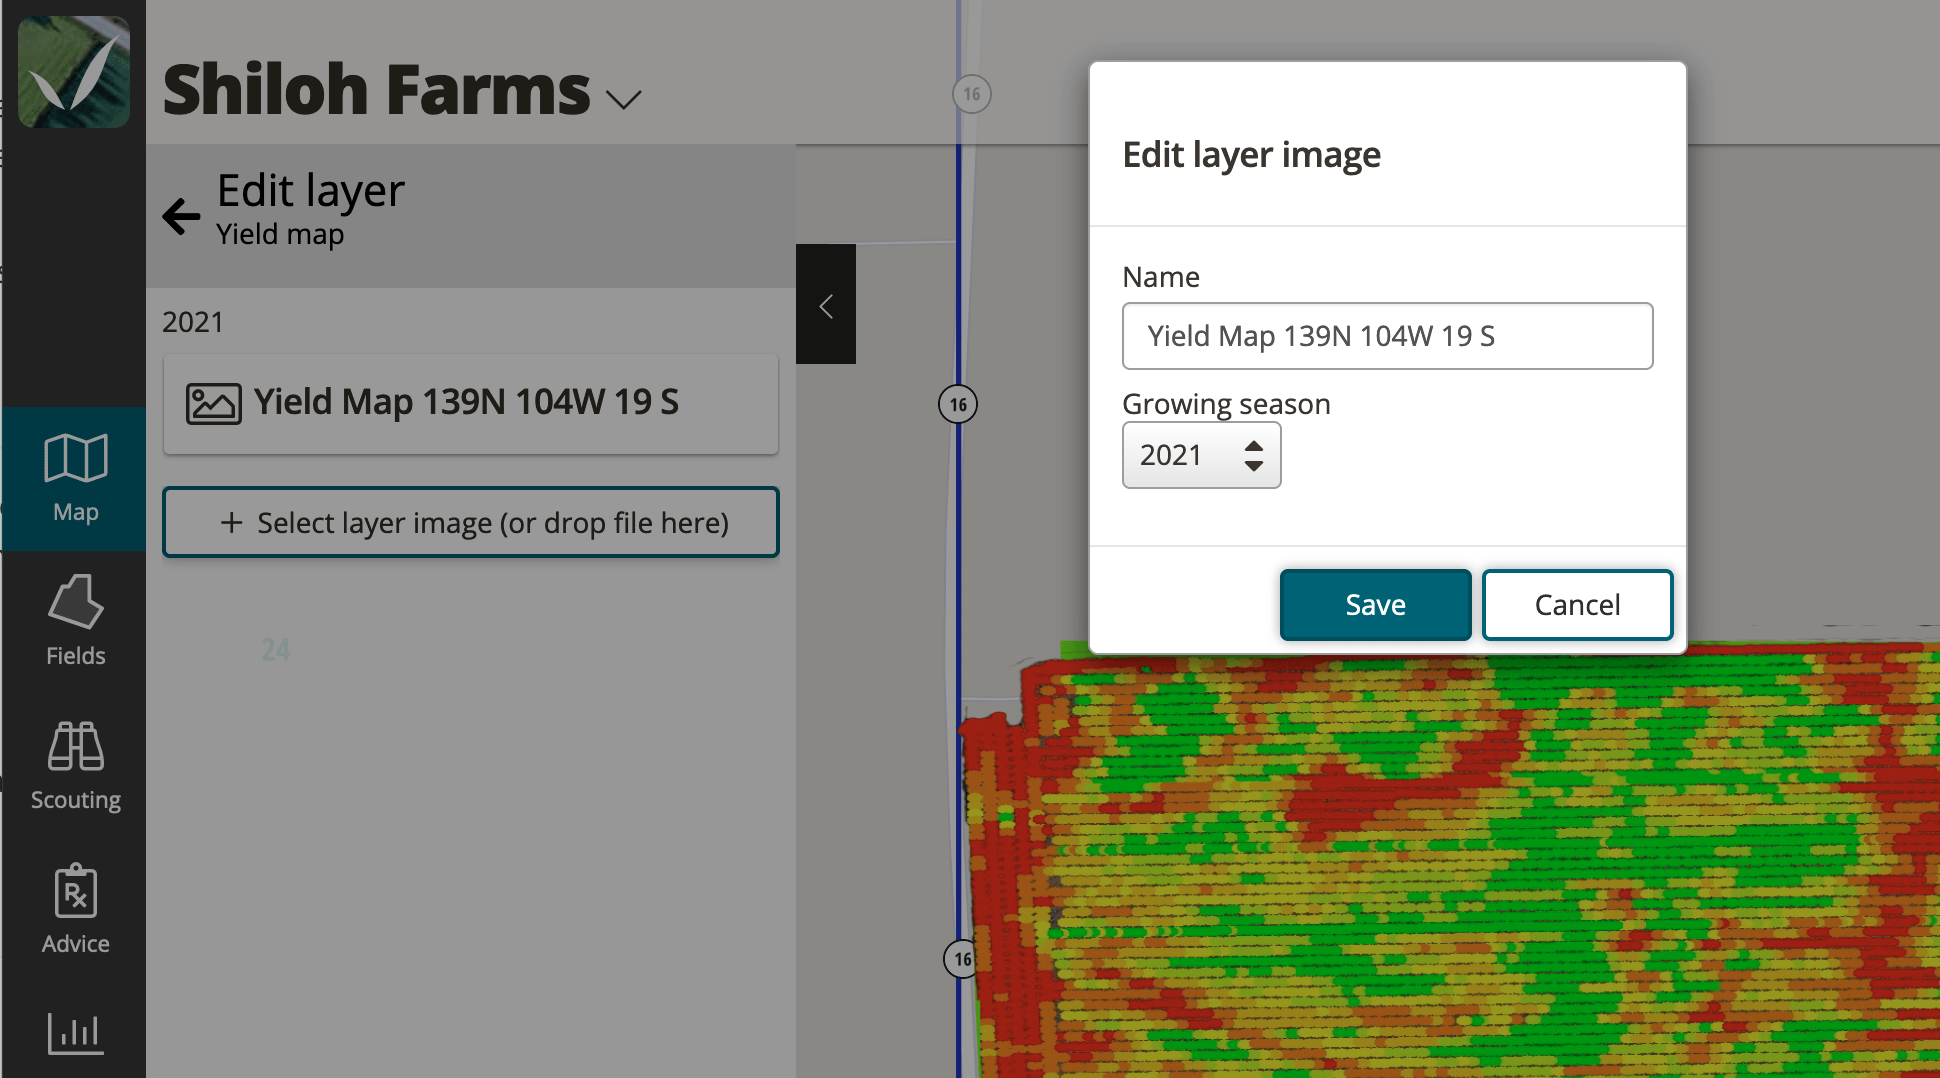 Example of a raster image and the editing options for a growing season layer.